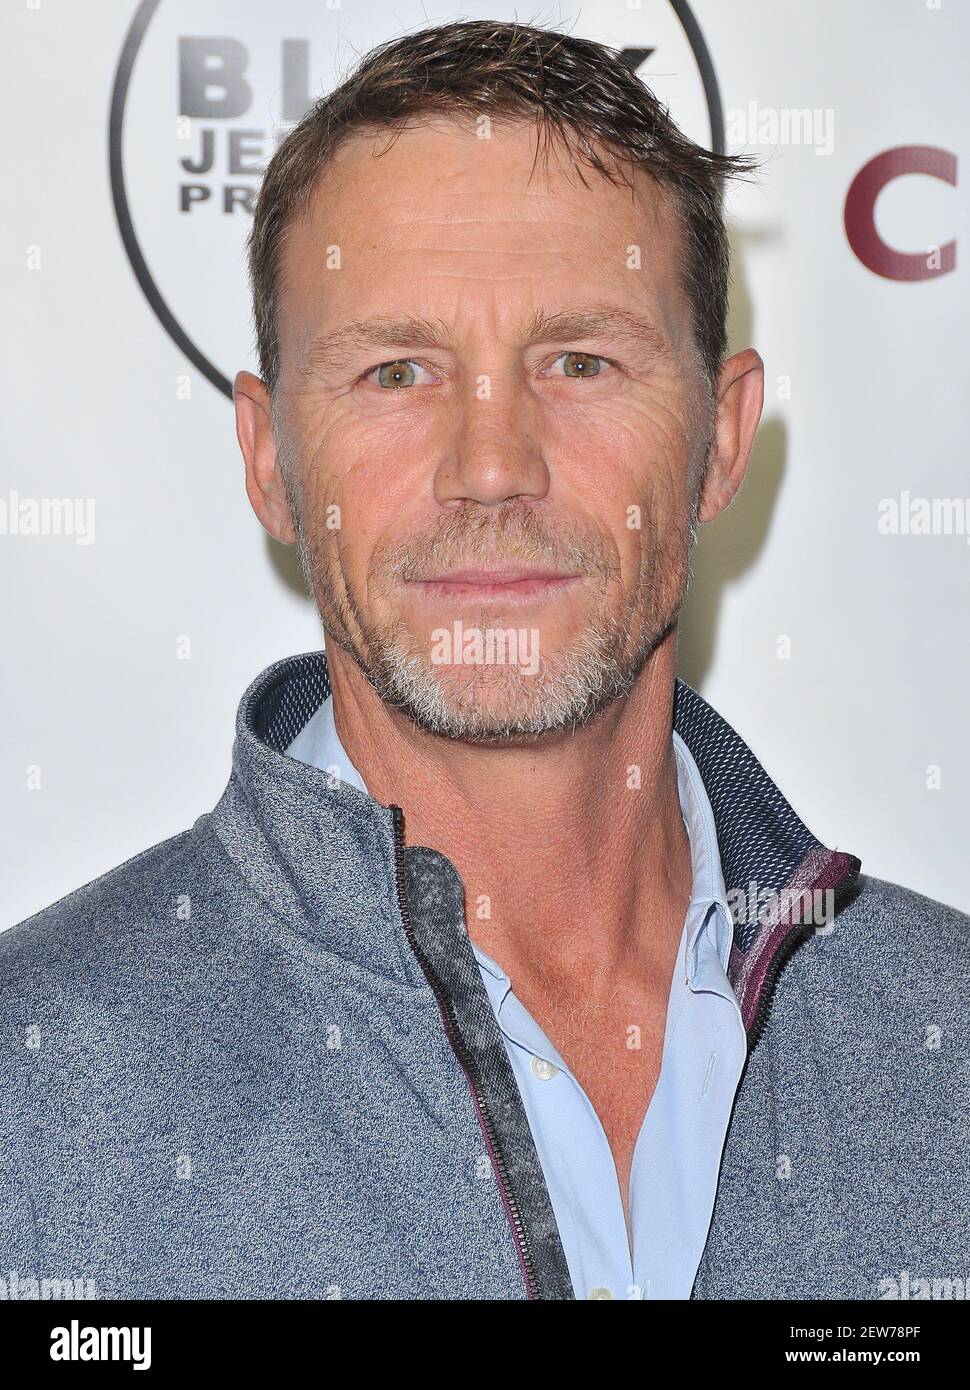 Brian Krause arrives at the "The Lost Tree" Los Angeles Premiere held at the TCL Chinese Theatre 6 in Hollywood, CA on Monday, October 9, 2017. (Photo By Sthanlee B. Mirador/Sipa USA) Stock Photo